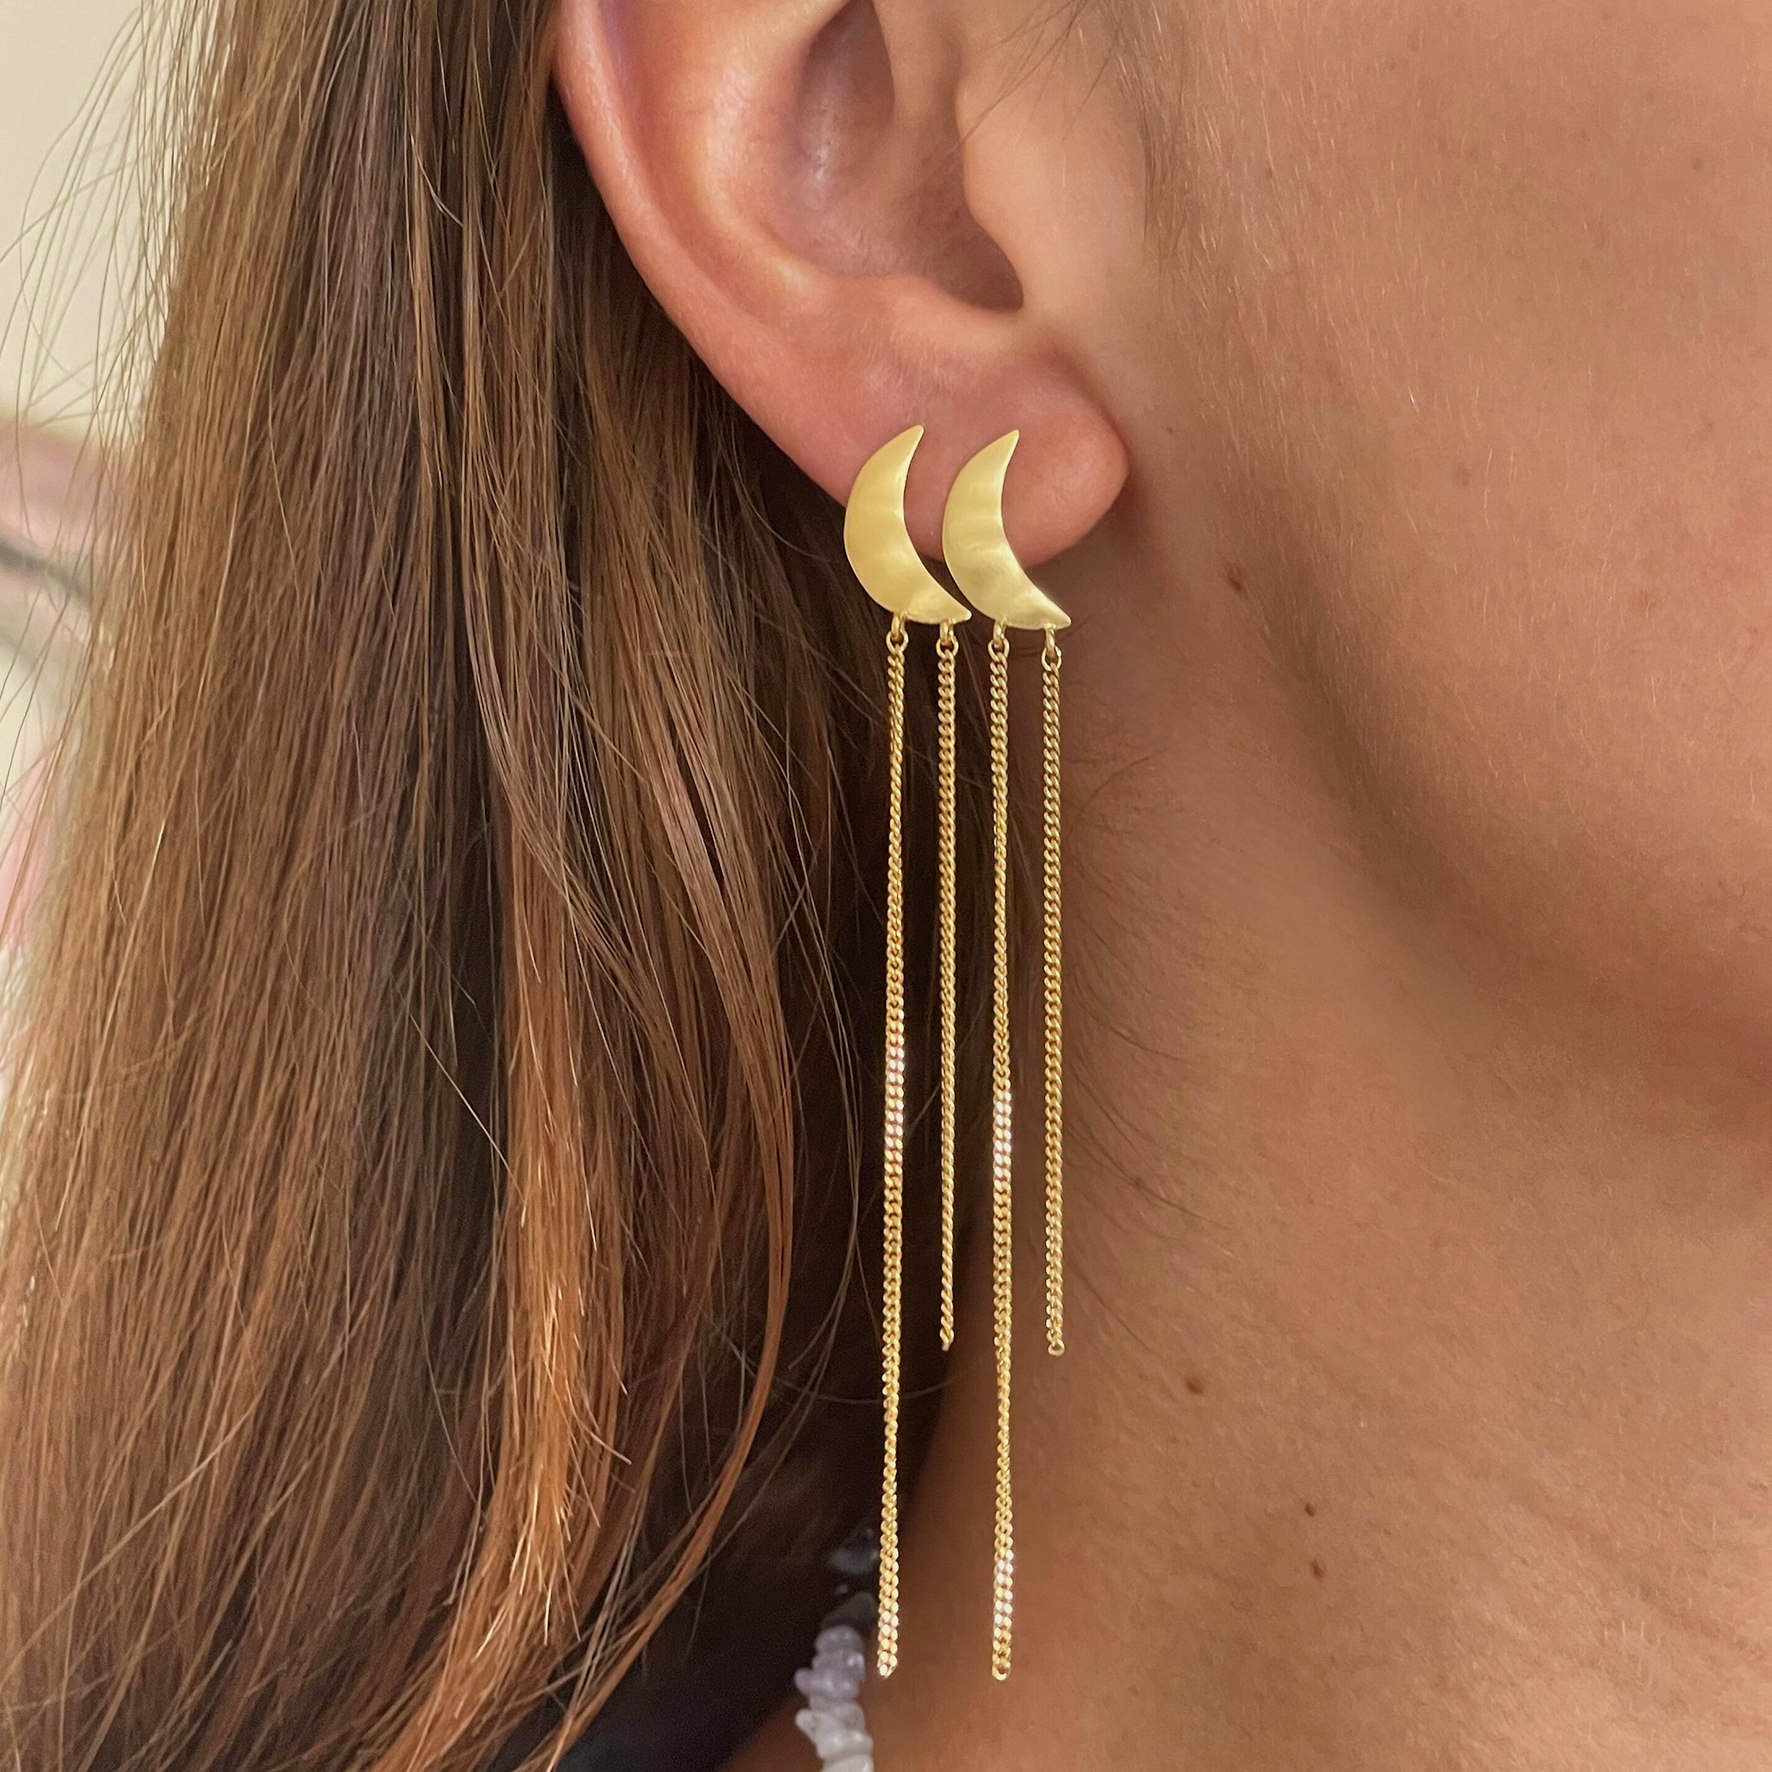 Bella Moon Earring with Long Chains from STINE A Jewelry in Goldplated Silver Sterling 925